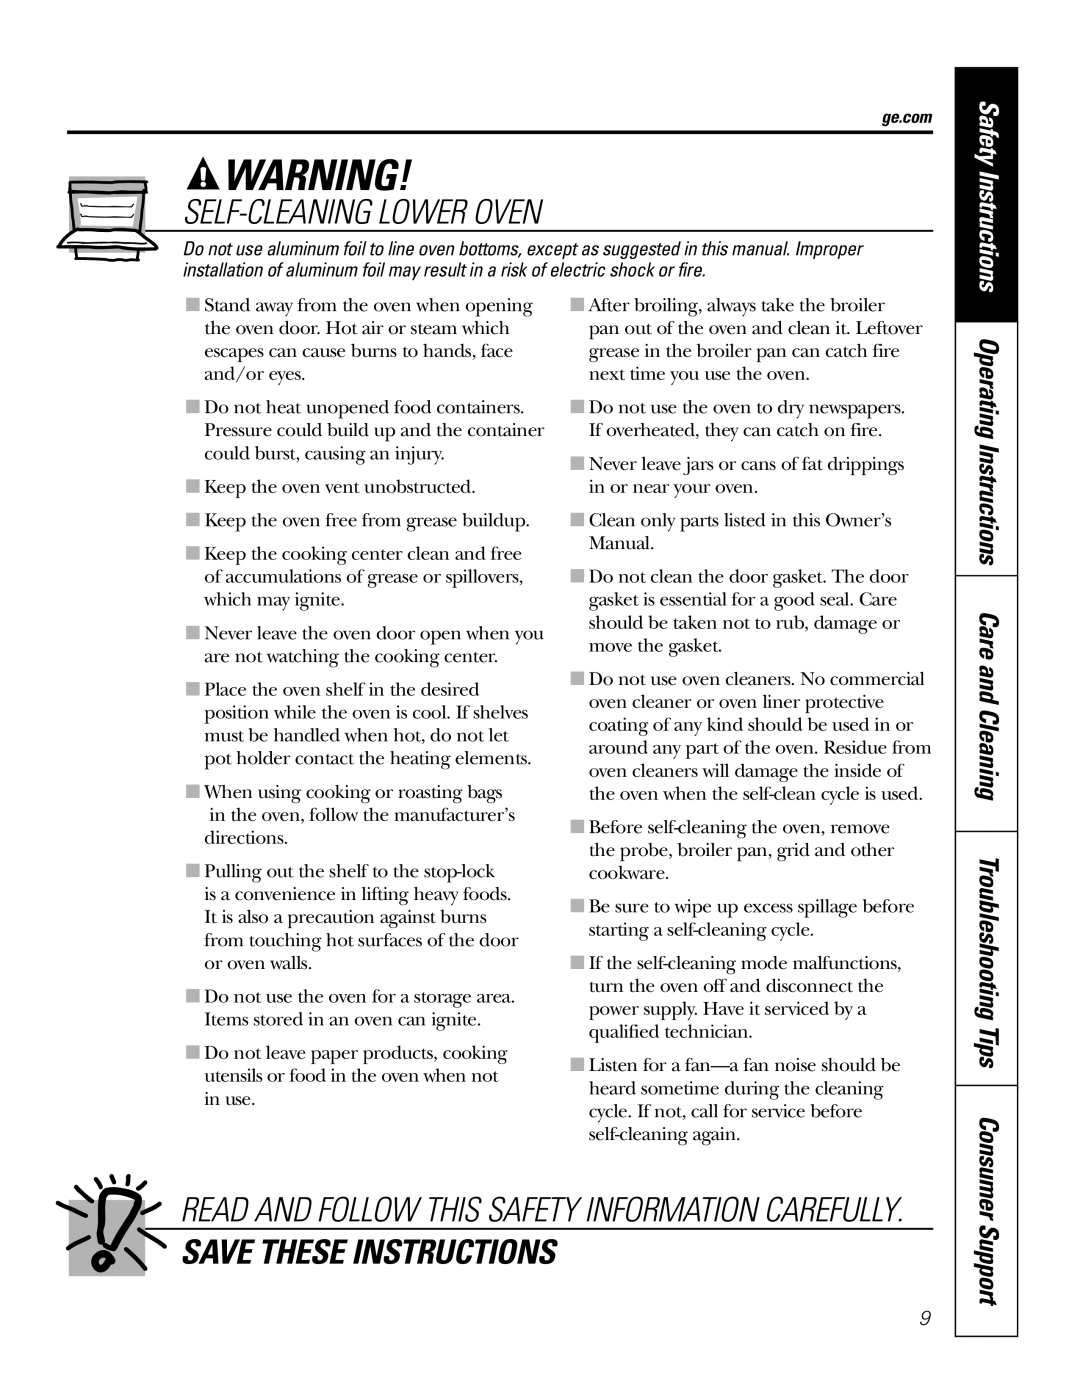 GE JT96530 manual Self-Cleaning Lower Oven, Save These Instructions, Support, Safety Instructions 